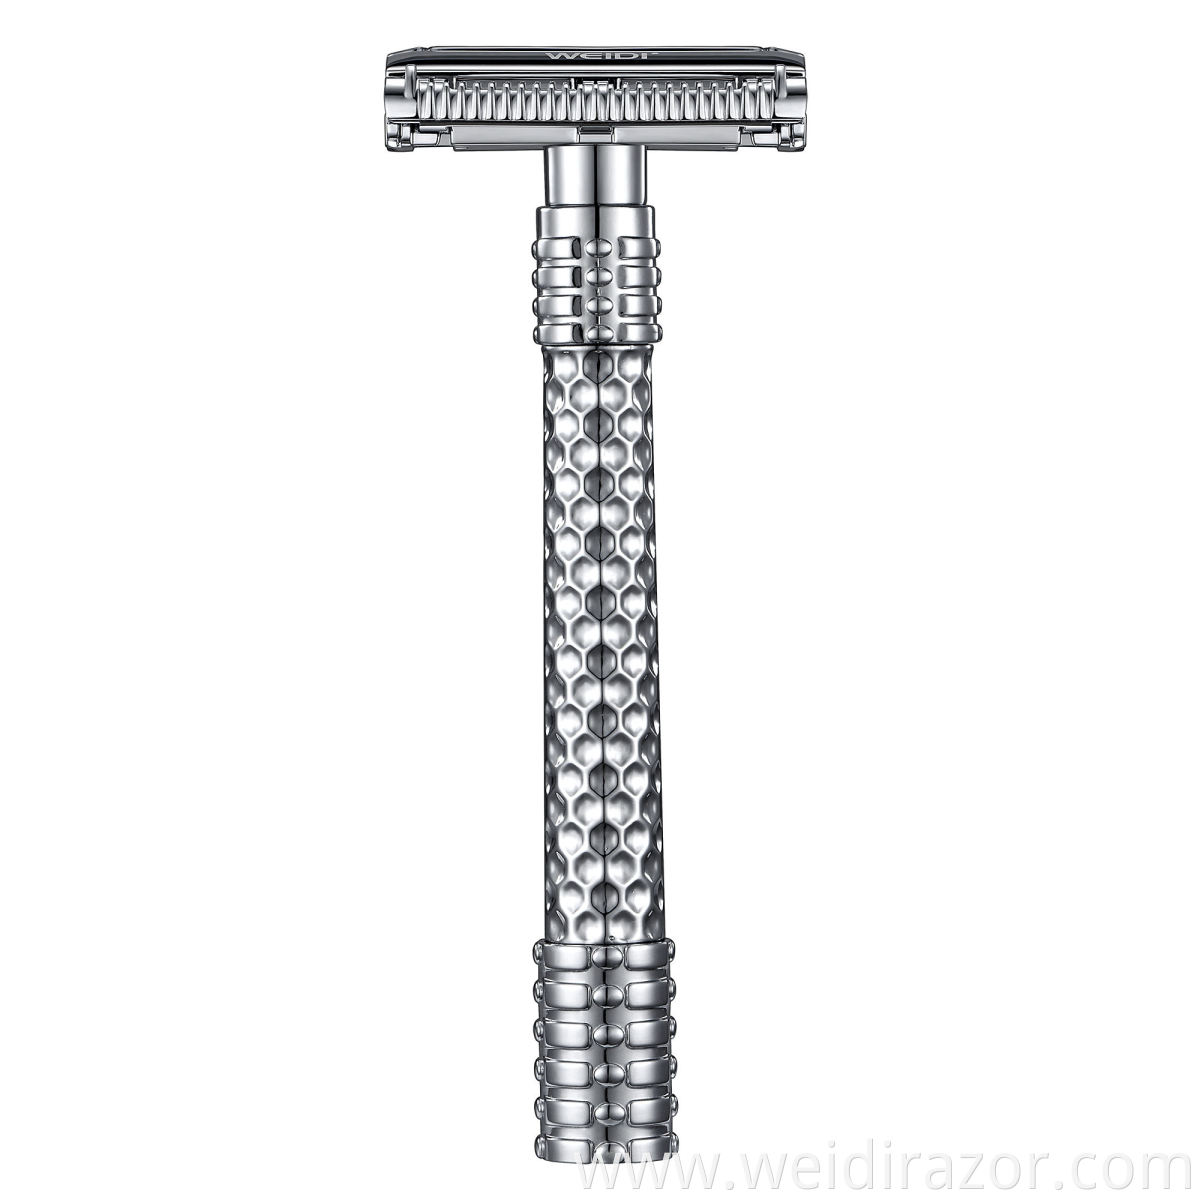 Best Razor Blade Private Label Branded Double Edge Safety Razor and Blade